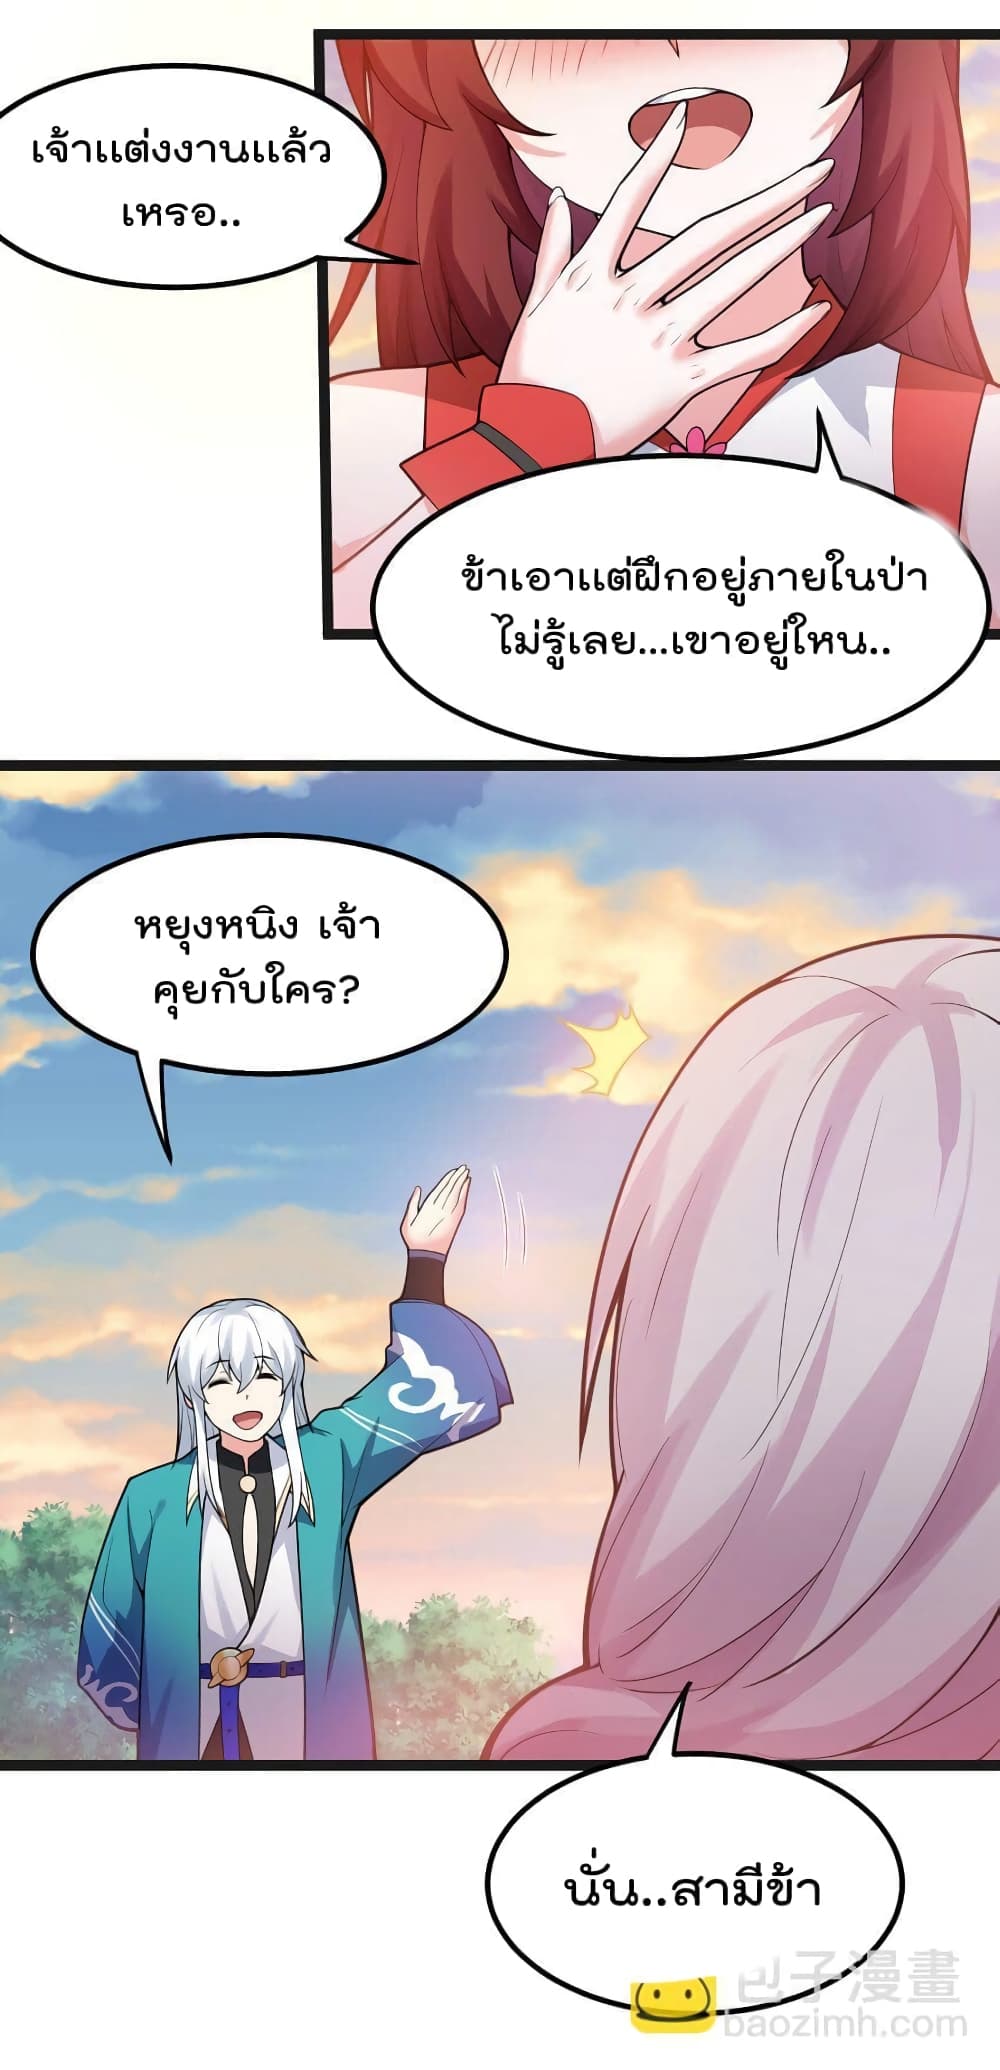 Godsian Masian from Another World ตอนที่ 122 (38)